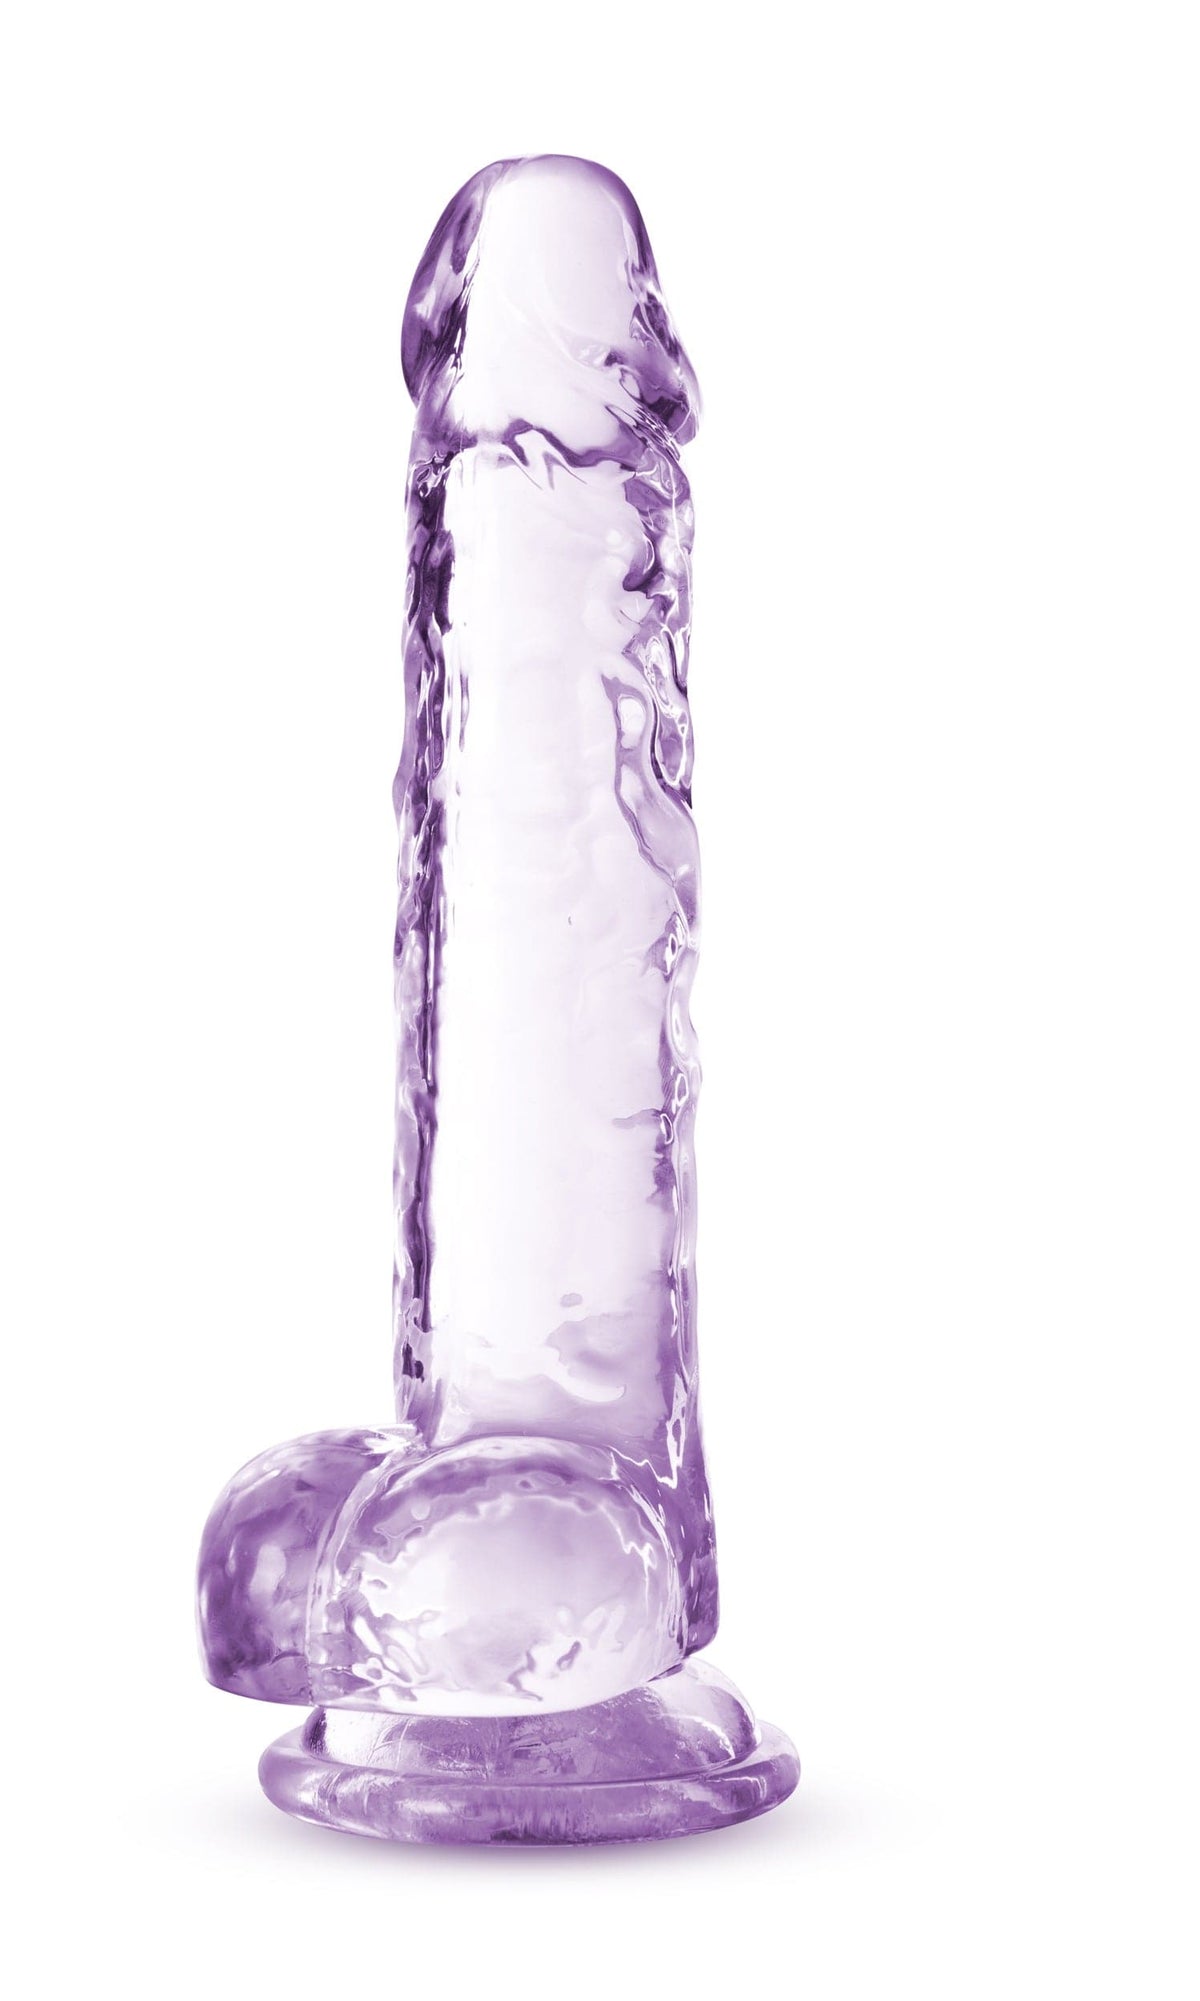 naturally yours 7 inch crystalline dildo amethhyst